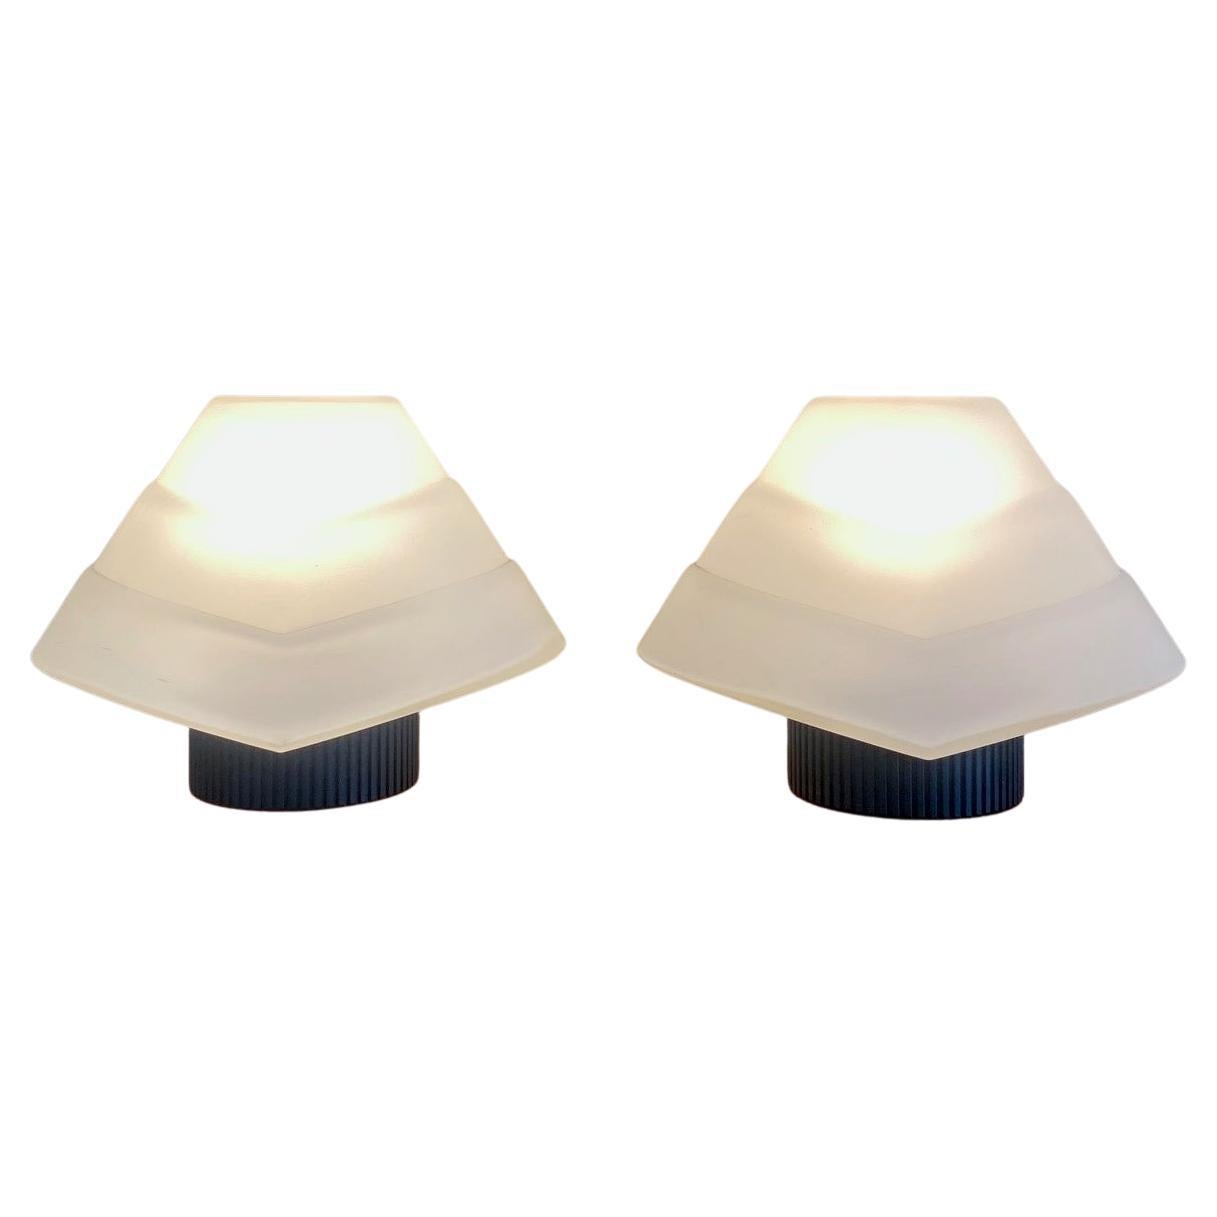 Glass and metal lamps, set of 2, 1980
Iconic postmodern design.
excelent condition.